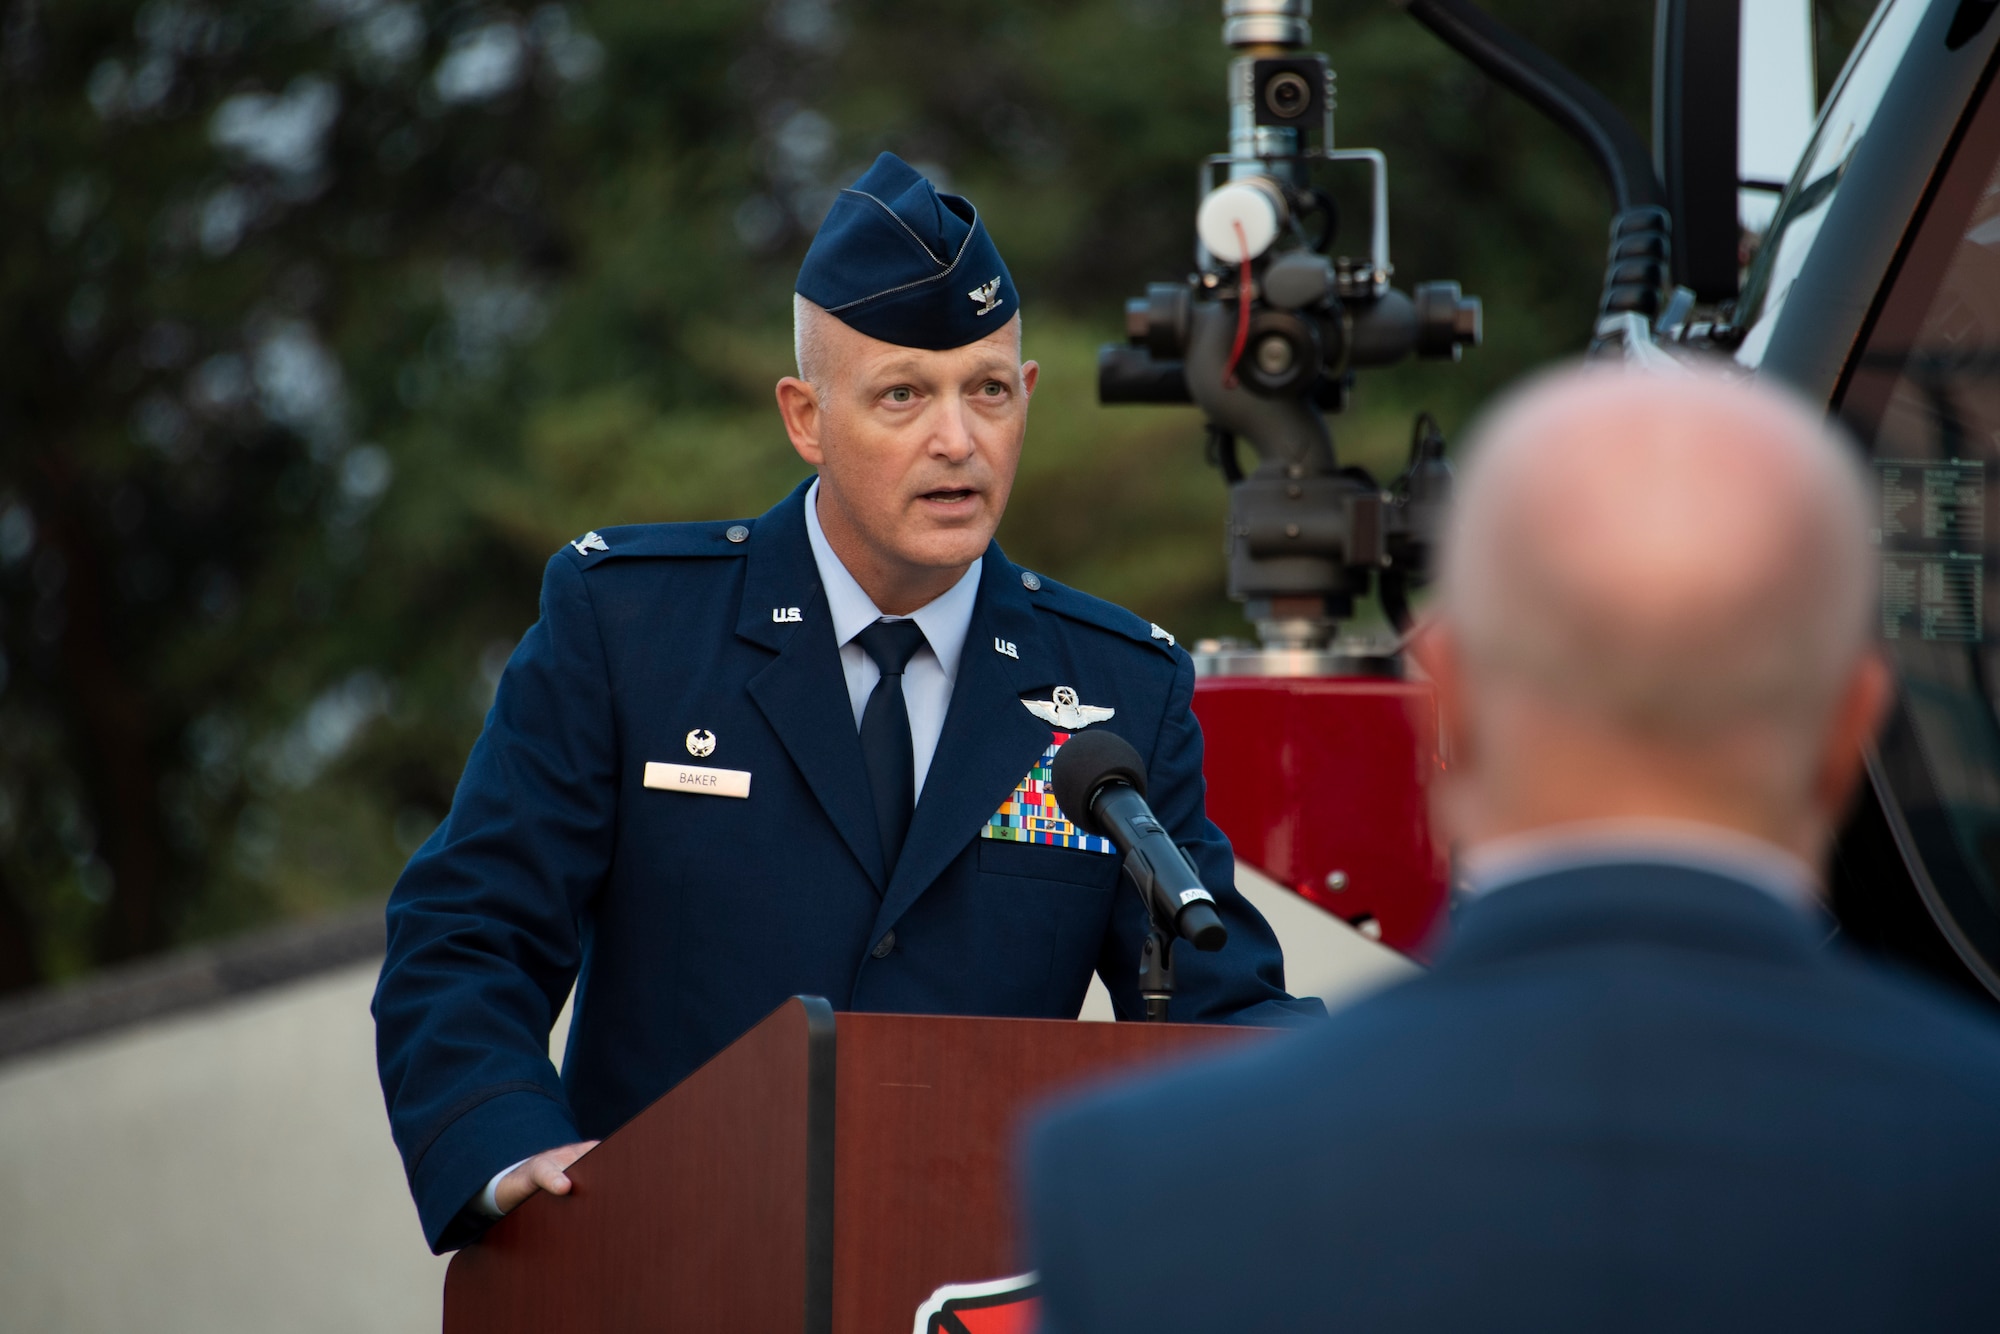 U.S. Air Force Col. Blaine Baker, 97th AMW commander, speaks during the 97th Air Mobility Wing Remembrance Ceremony at Altus Air Force Base, Oklahoma, Sept. 11, 2021. The purpose of the ceremony was to honor the firefighters, law enforcement officers and medical responders who lost their lives on this day 20 years ago during the attacks on 9/11. (U.S. Air Force photo by Senior Airman Amanda Lovelace)